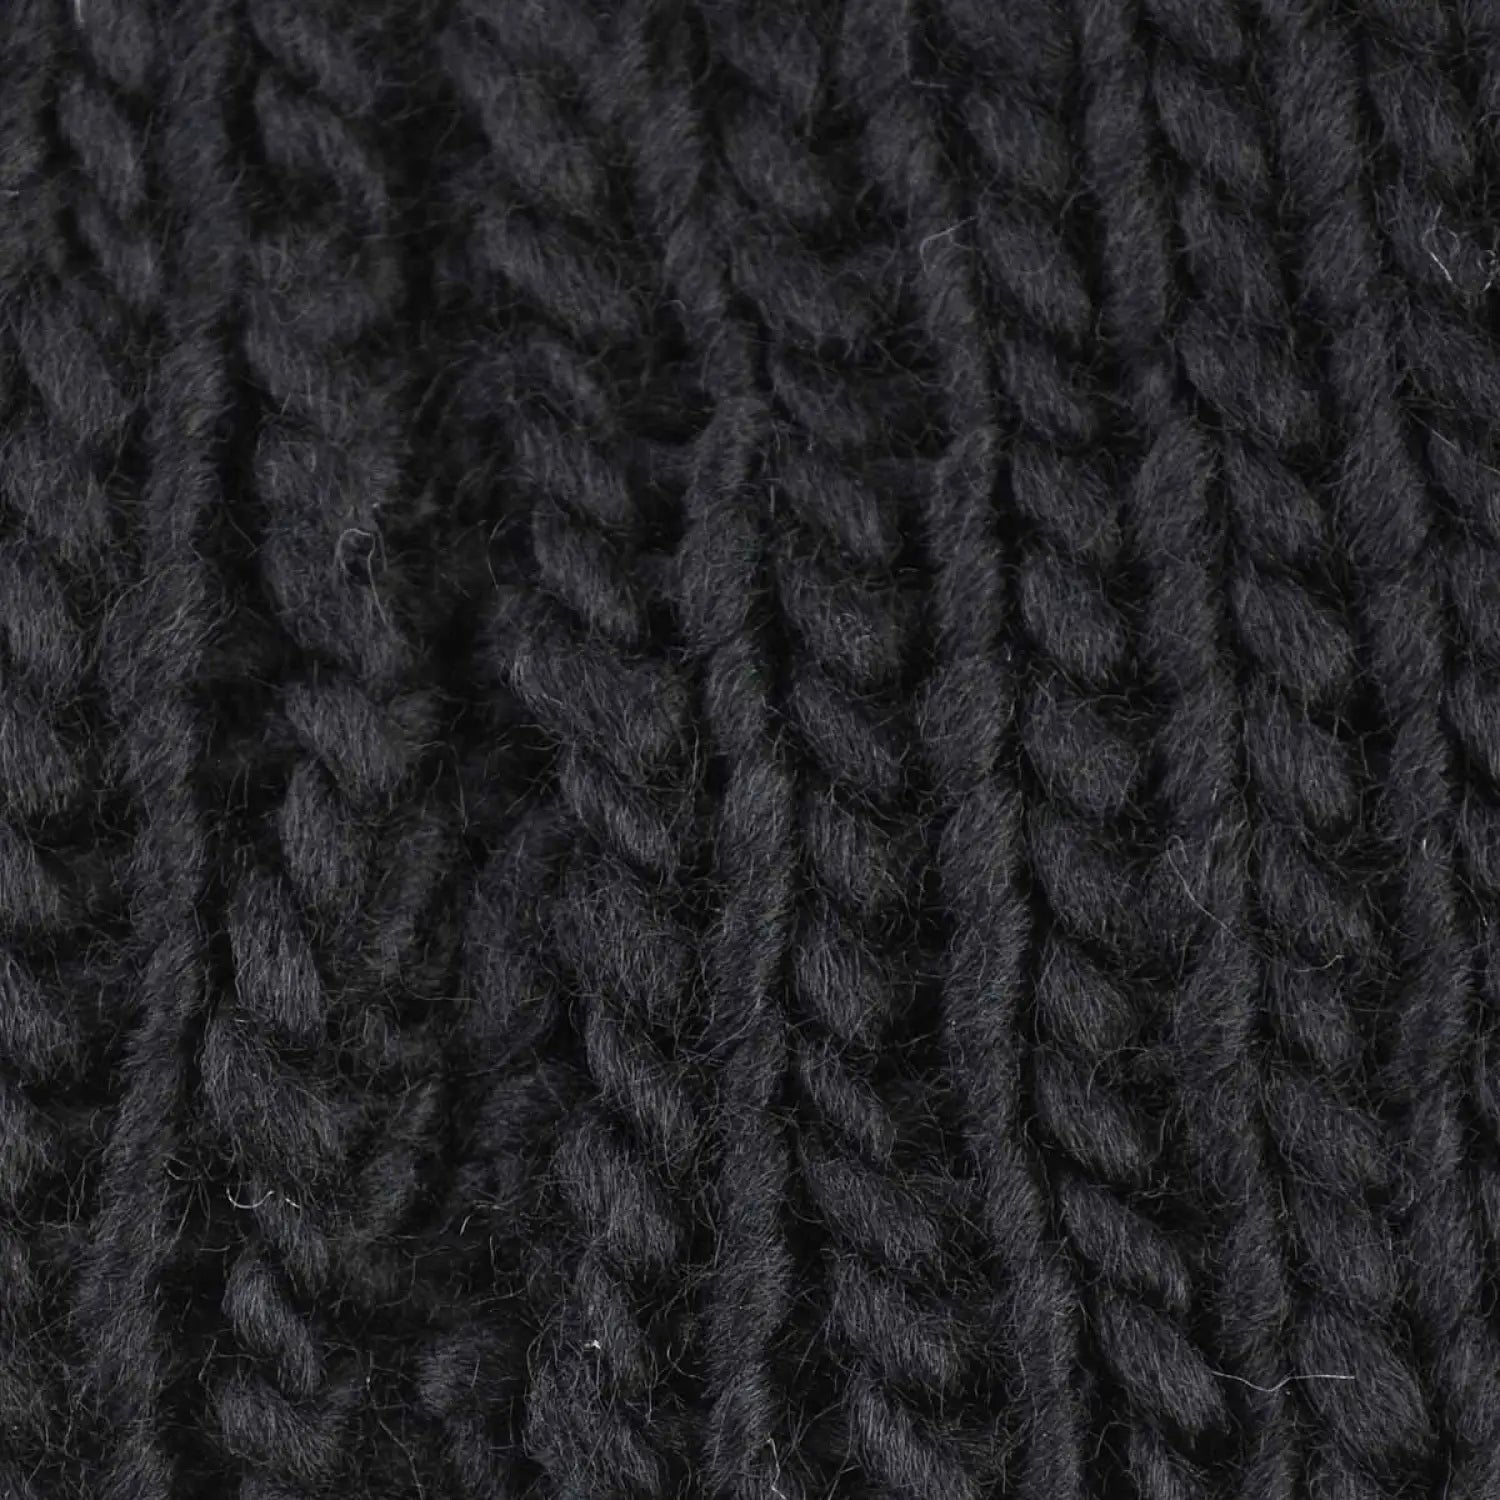 Black wool yarn close up on bow detailed knitted headband